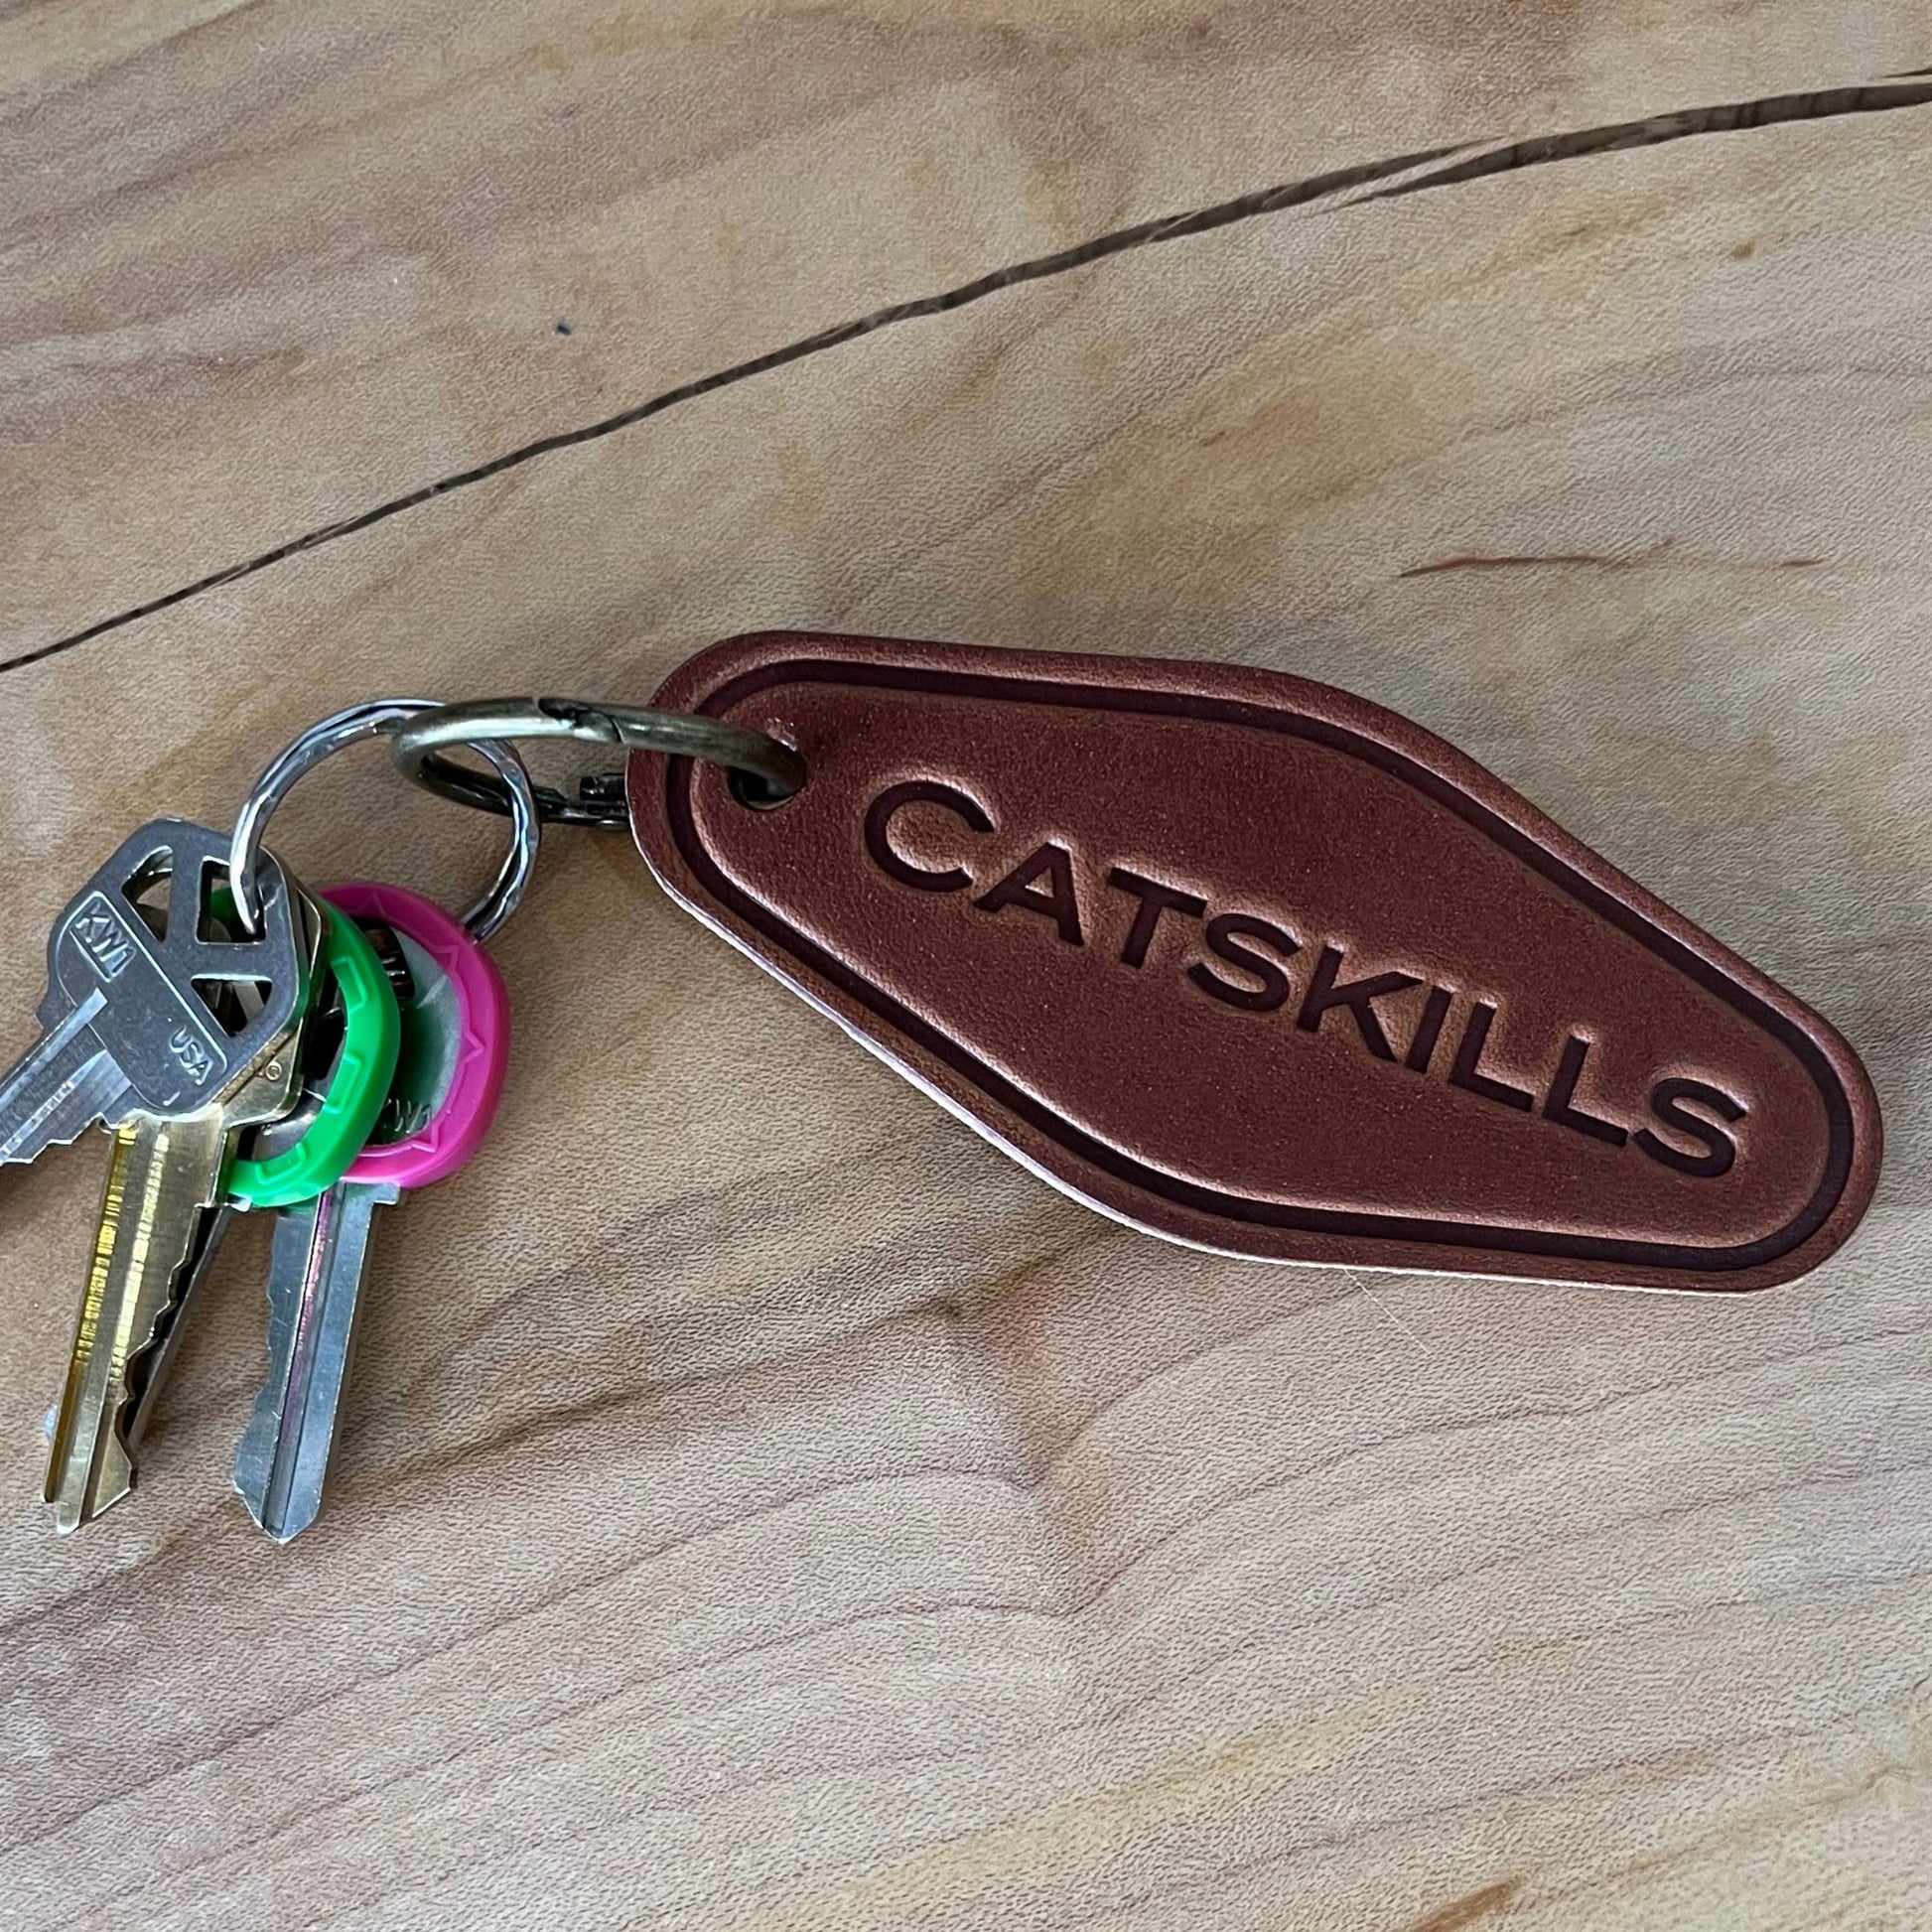 Catskills Leather Keychain made of leather, cut and pressed by hand from some of the thickest and finest harness leather available.